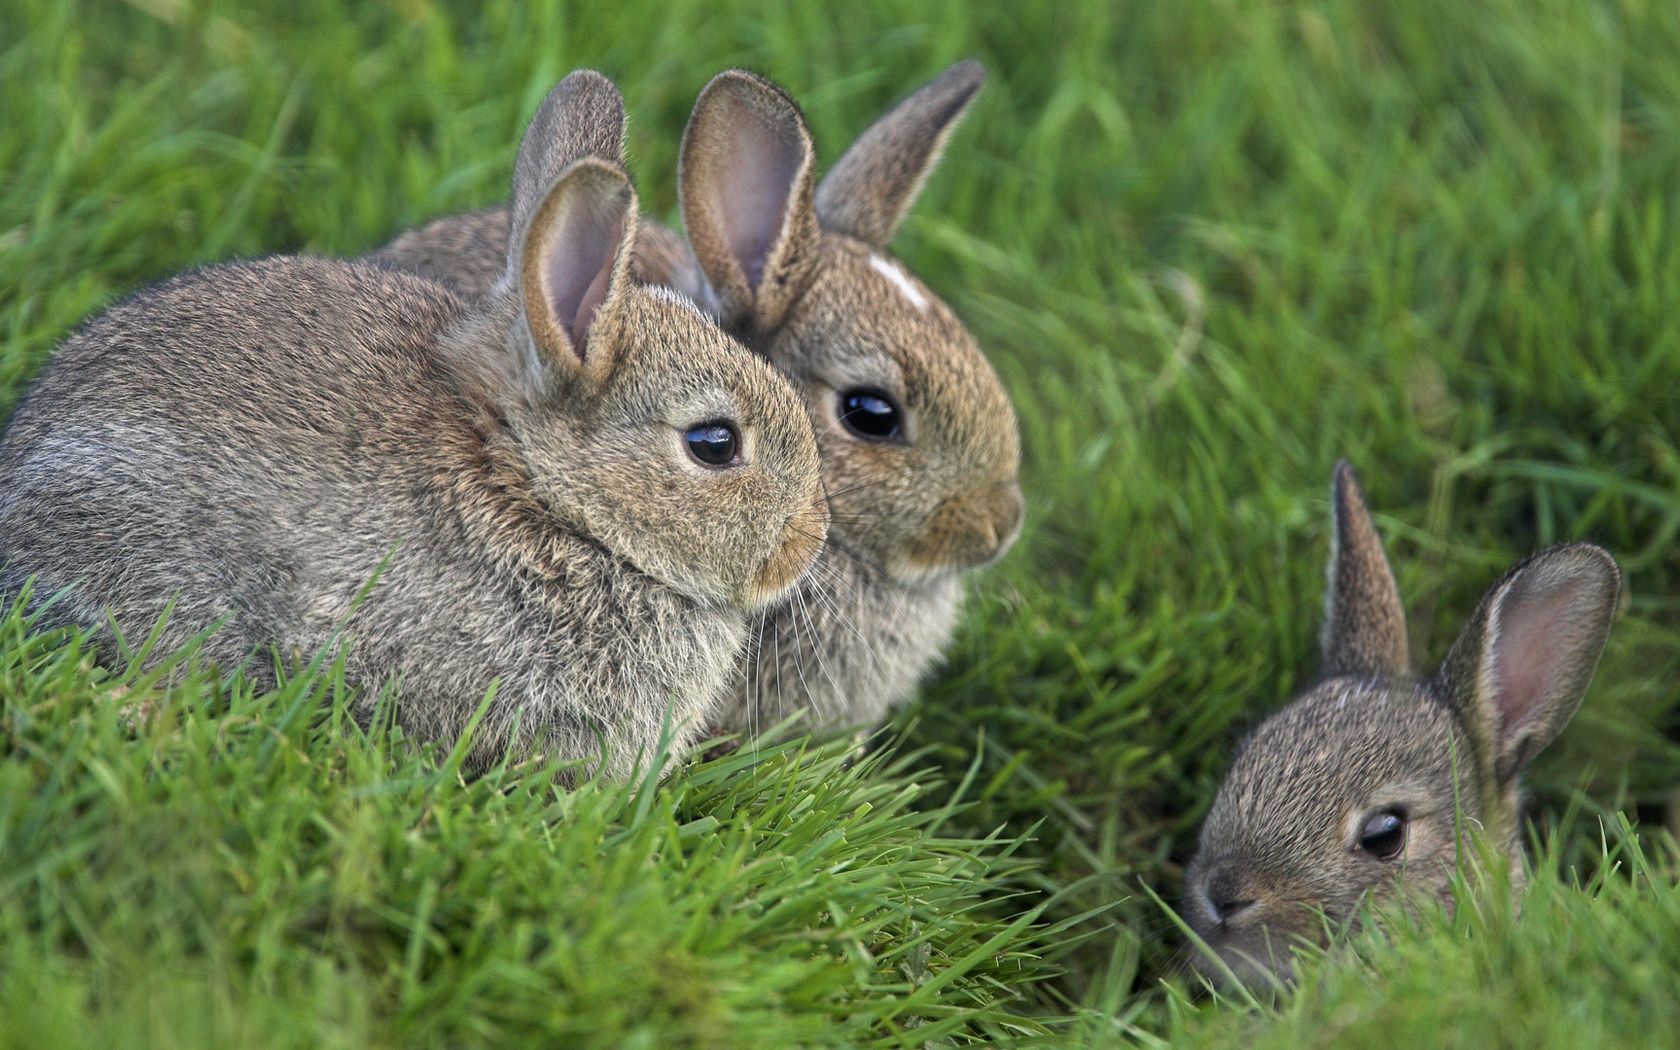 rabbits, animals, grass, sit, hide, fear, disguise, camouflage, three